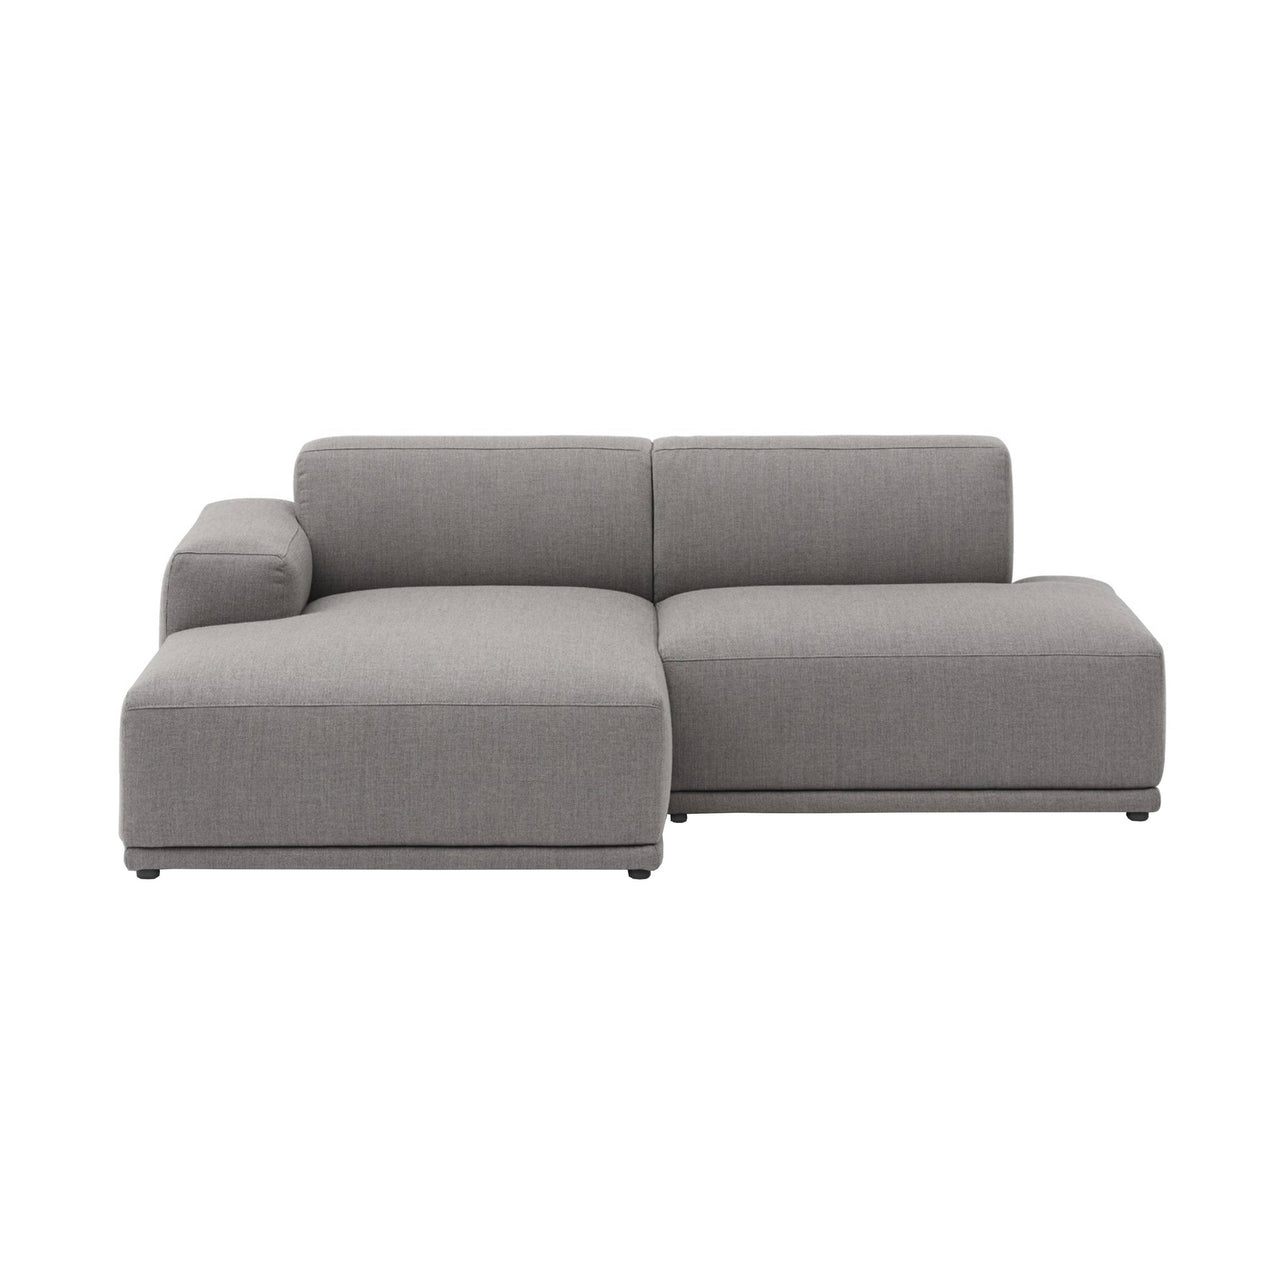 Connect Soft Modular Sofa: 2 Seater + Configuration 3 + Re-Wool 128